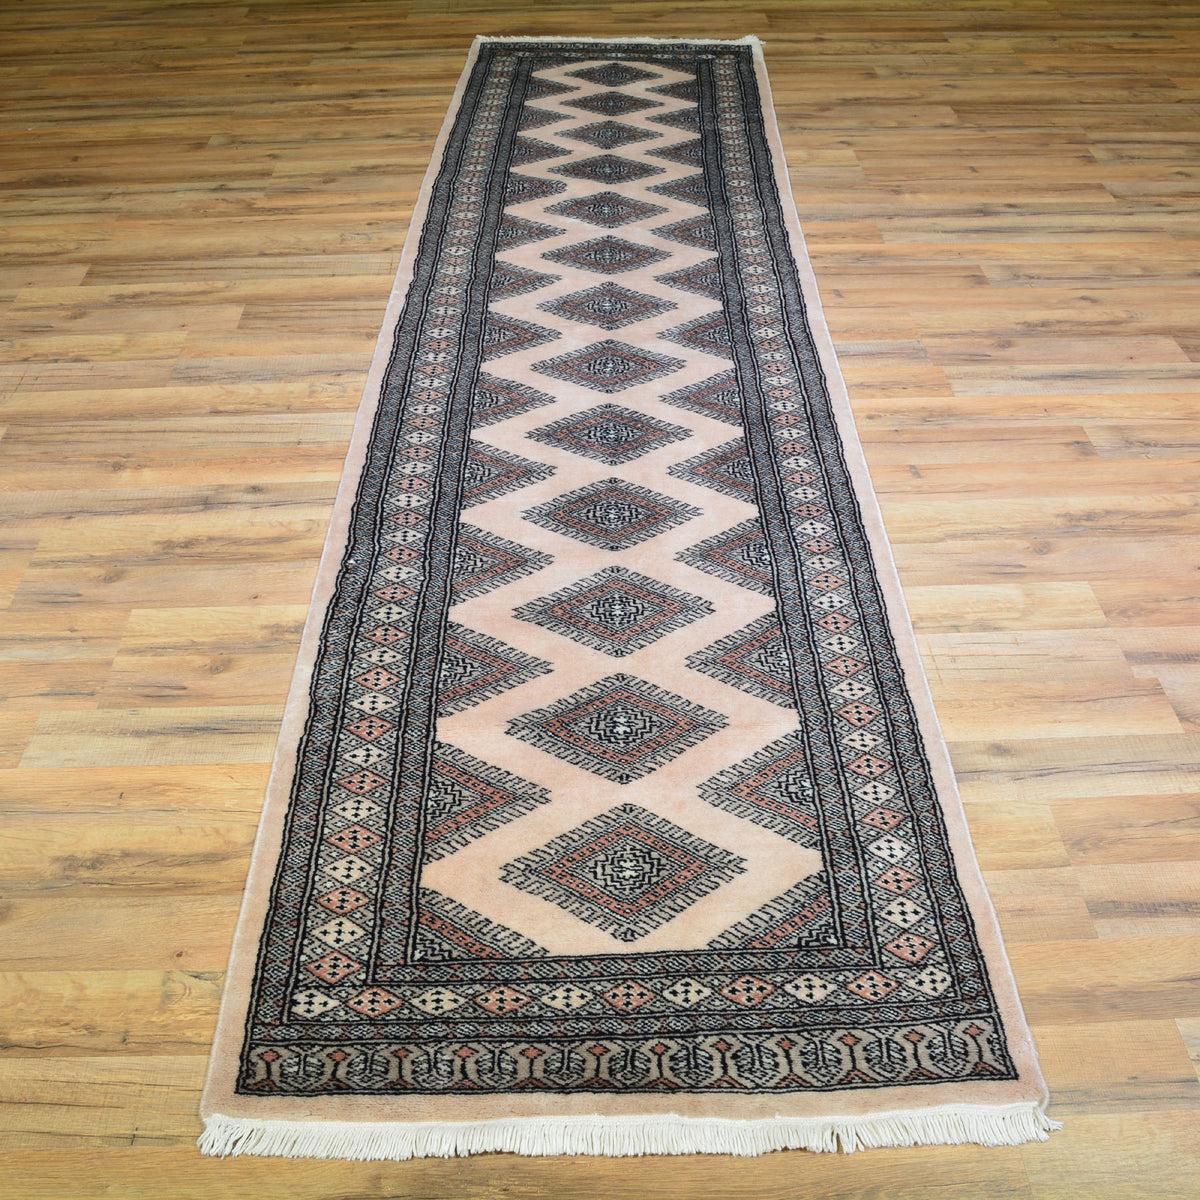 a 2x4 Small Rug an Authentic Hand Knotted Bokhara Jaldar Rug 2'6 x 4'2 Pak Mori Bokhara Area Rug with Wool Pile 